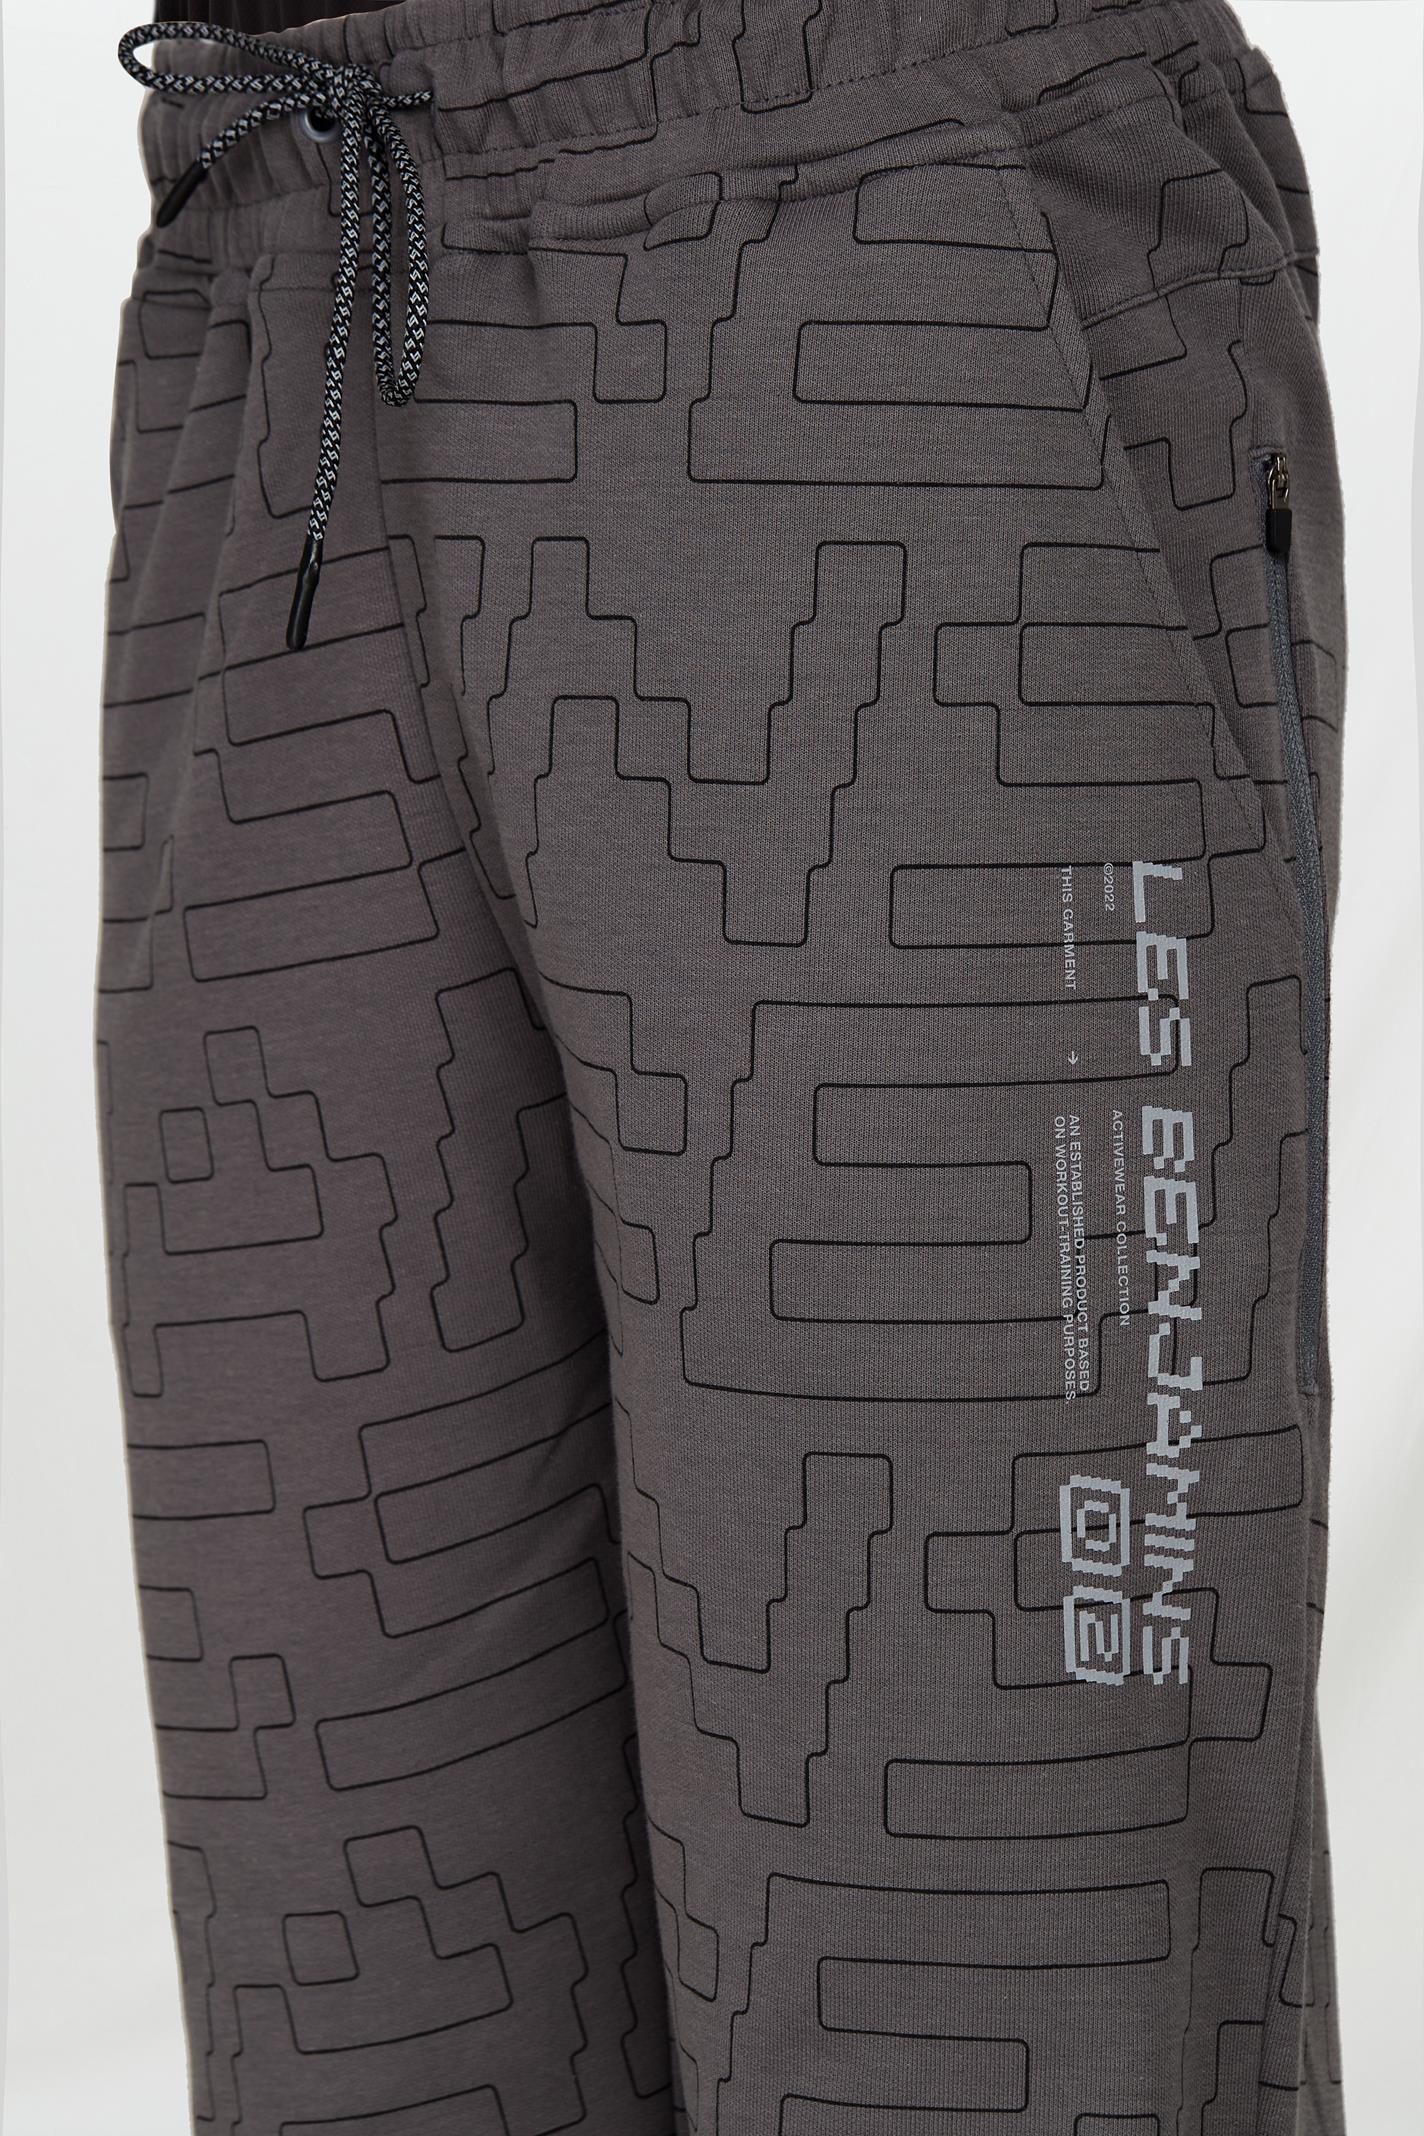 TRACKPANT 502